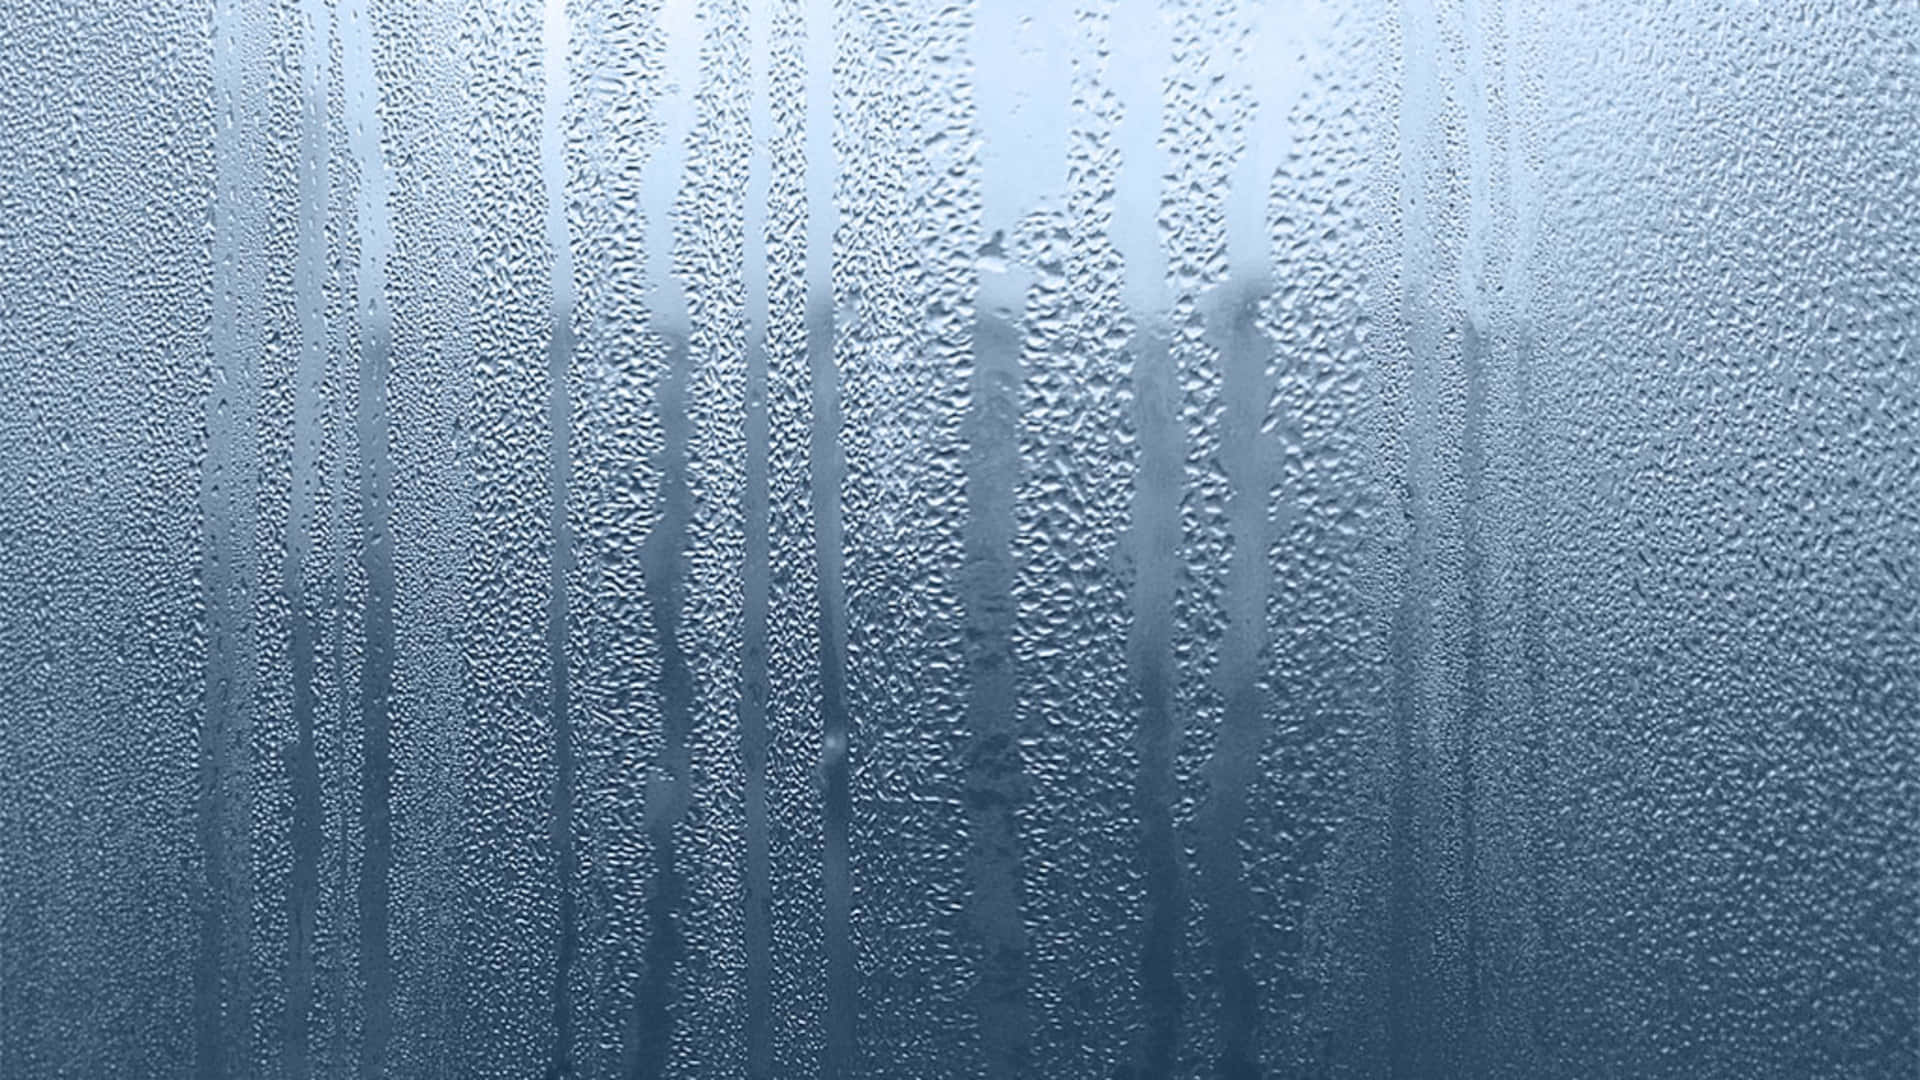 A Blue Window With Water Drops On It